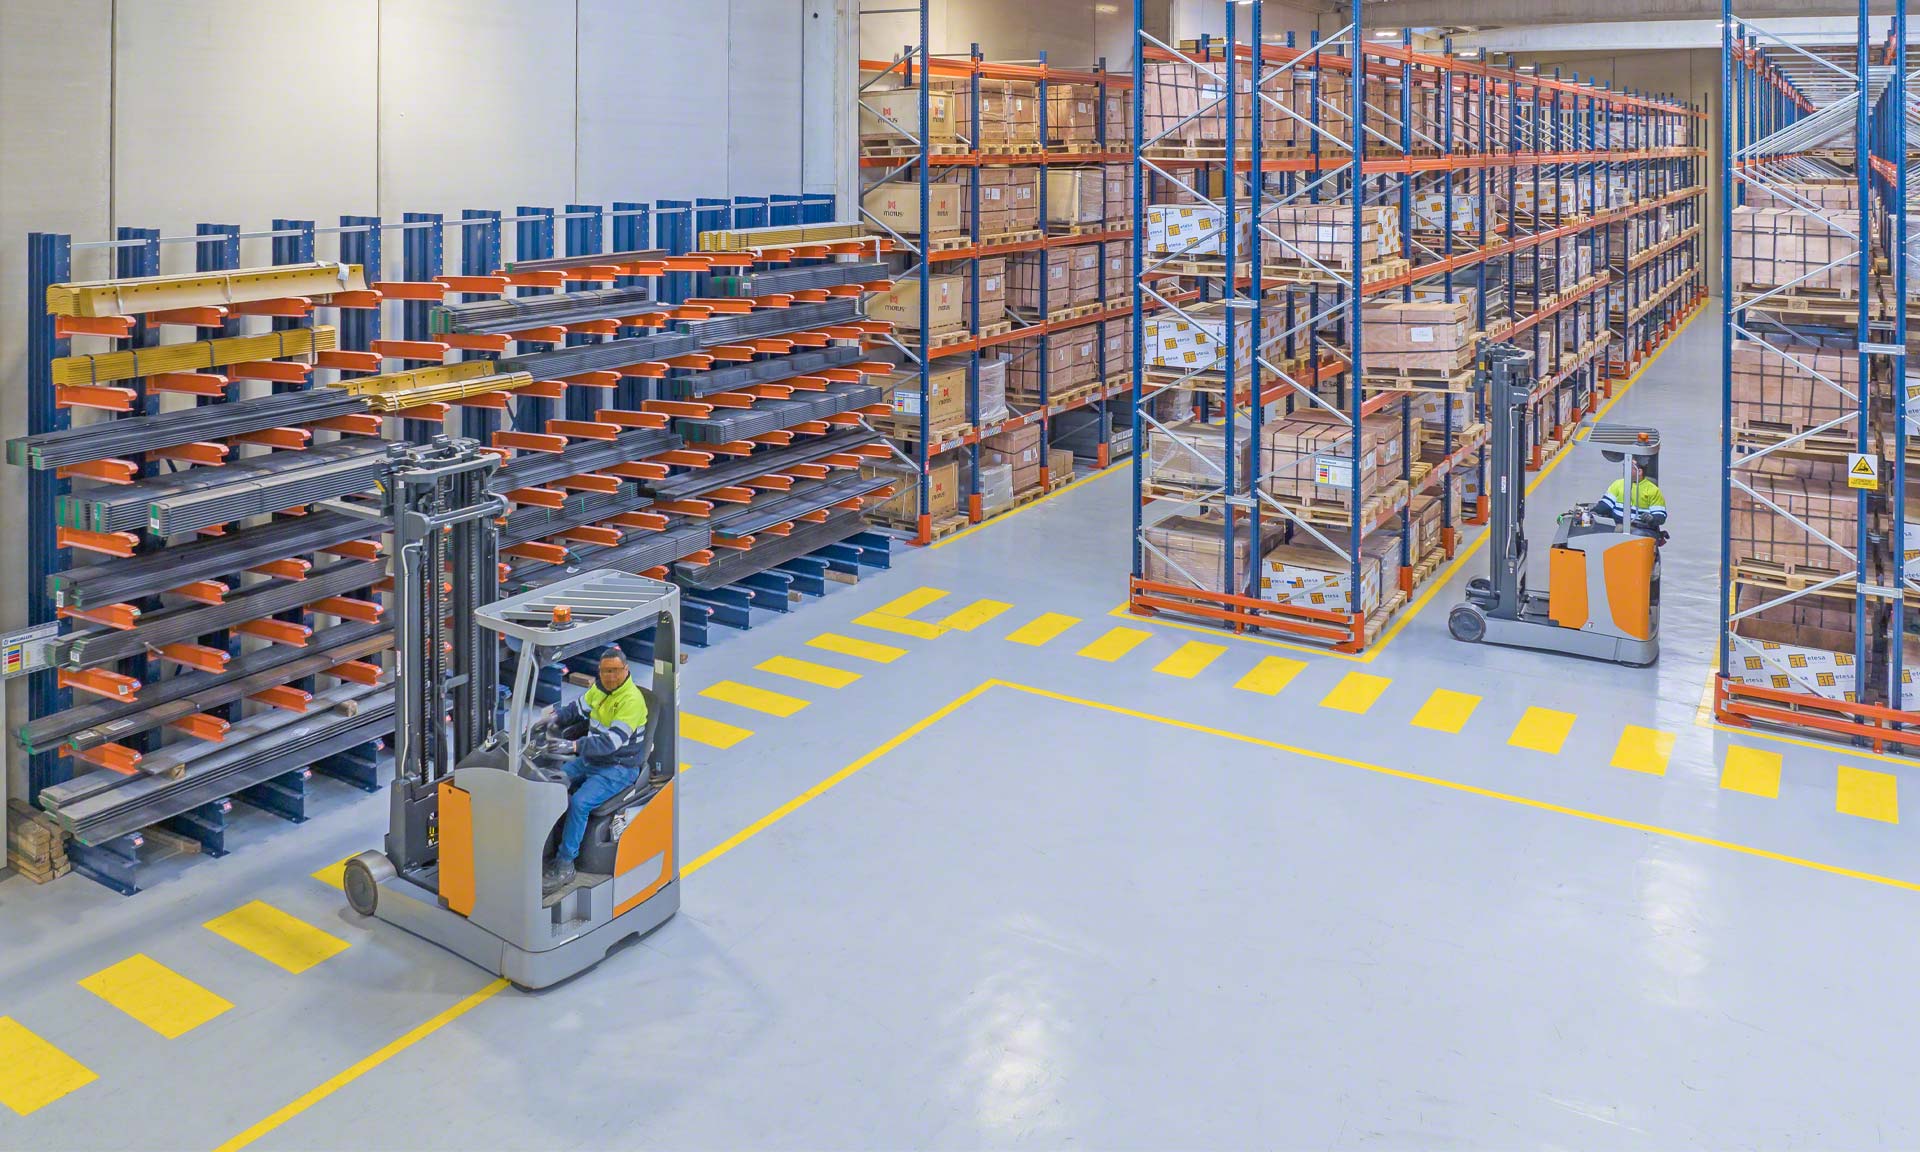 ETESA digitizes its warehouse management with Mecalux's Easy WMS